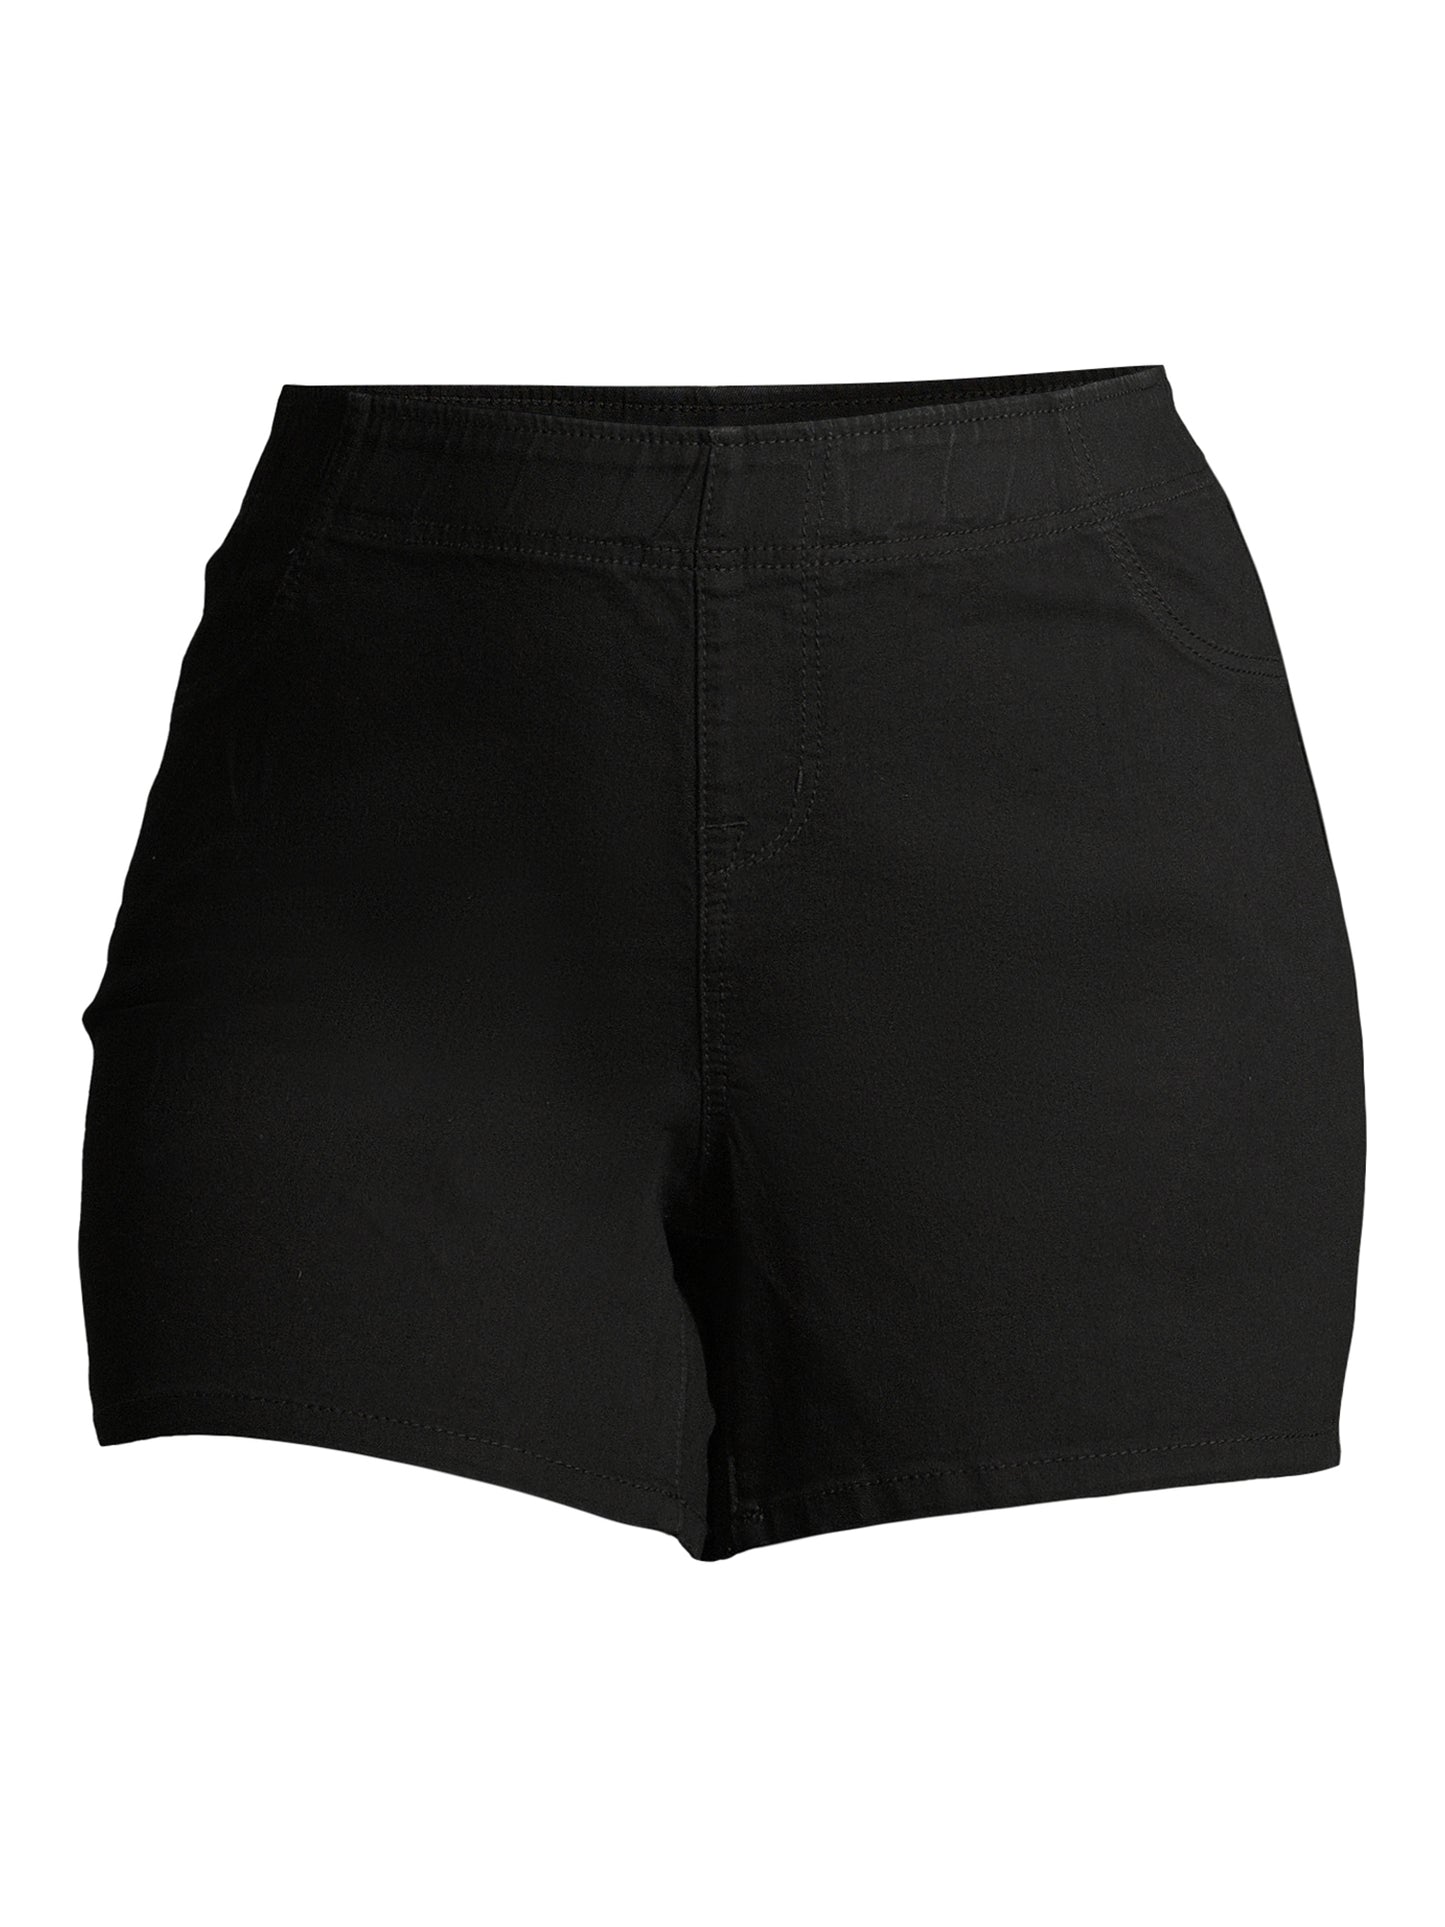 A3 Women's Plus 5 Inch Elastic Waistband Pull On Shorts